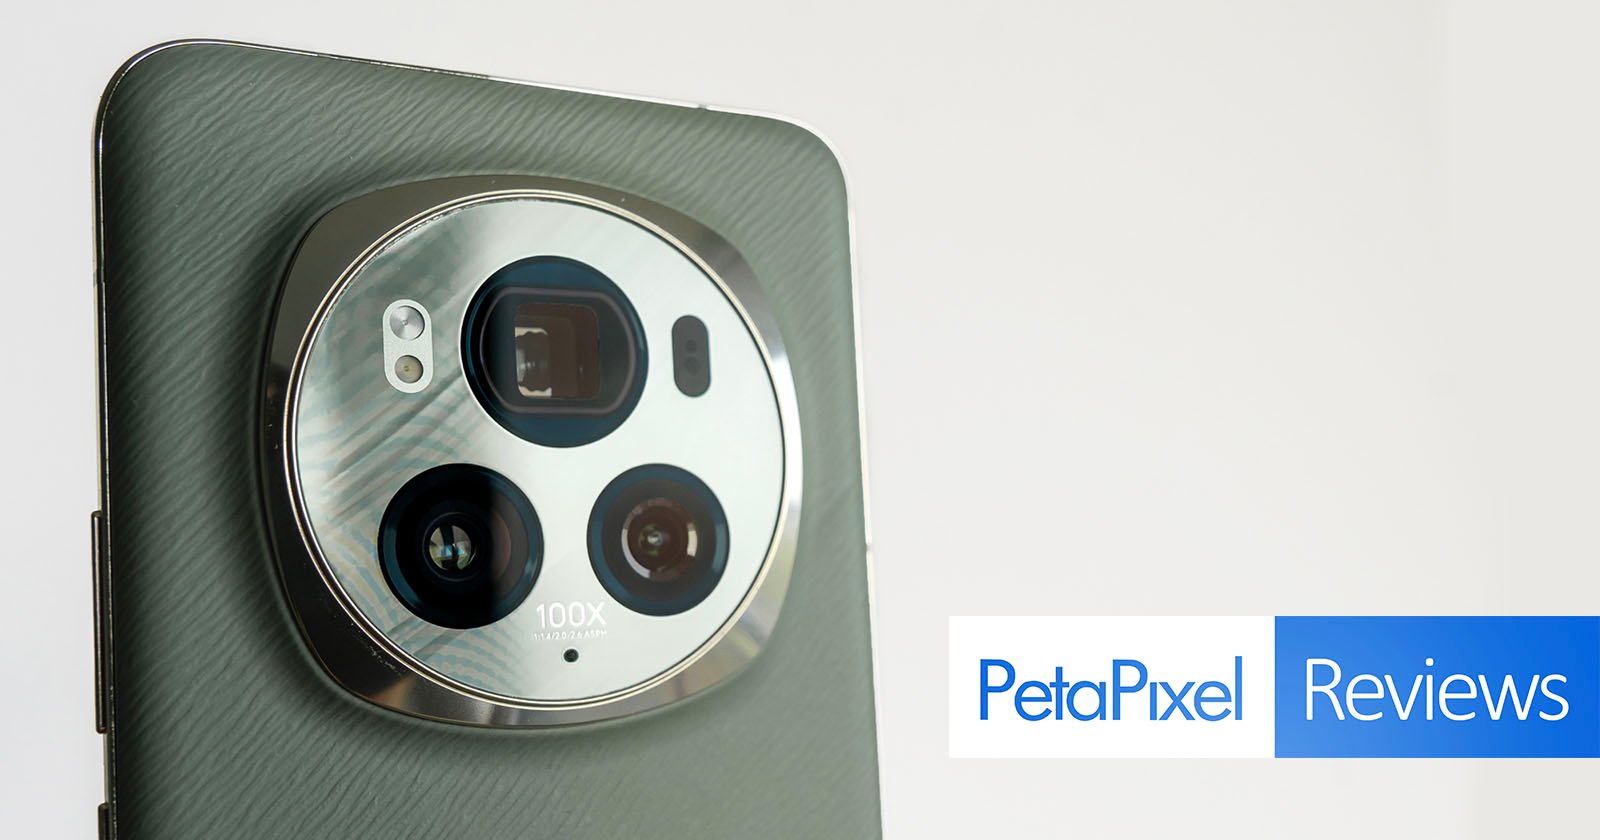 Close-up of a smartphone's camera setup featuring multiple lenses and 100x label, against a light grey background, with a petapixel reviews logo in the corner.